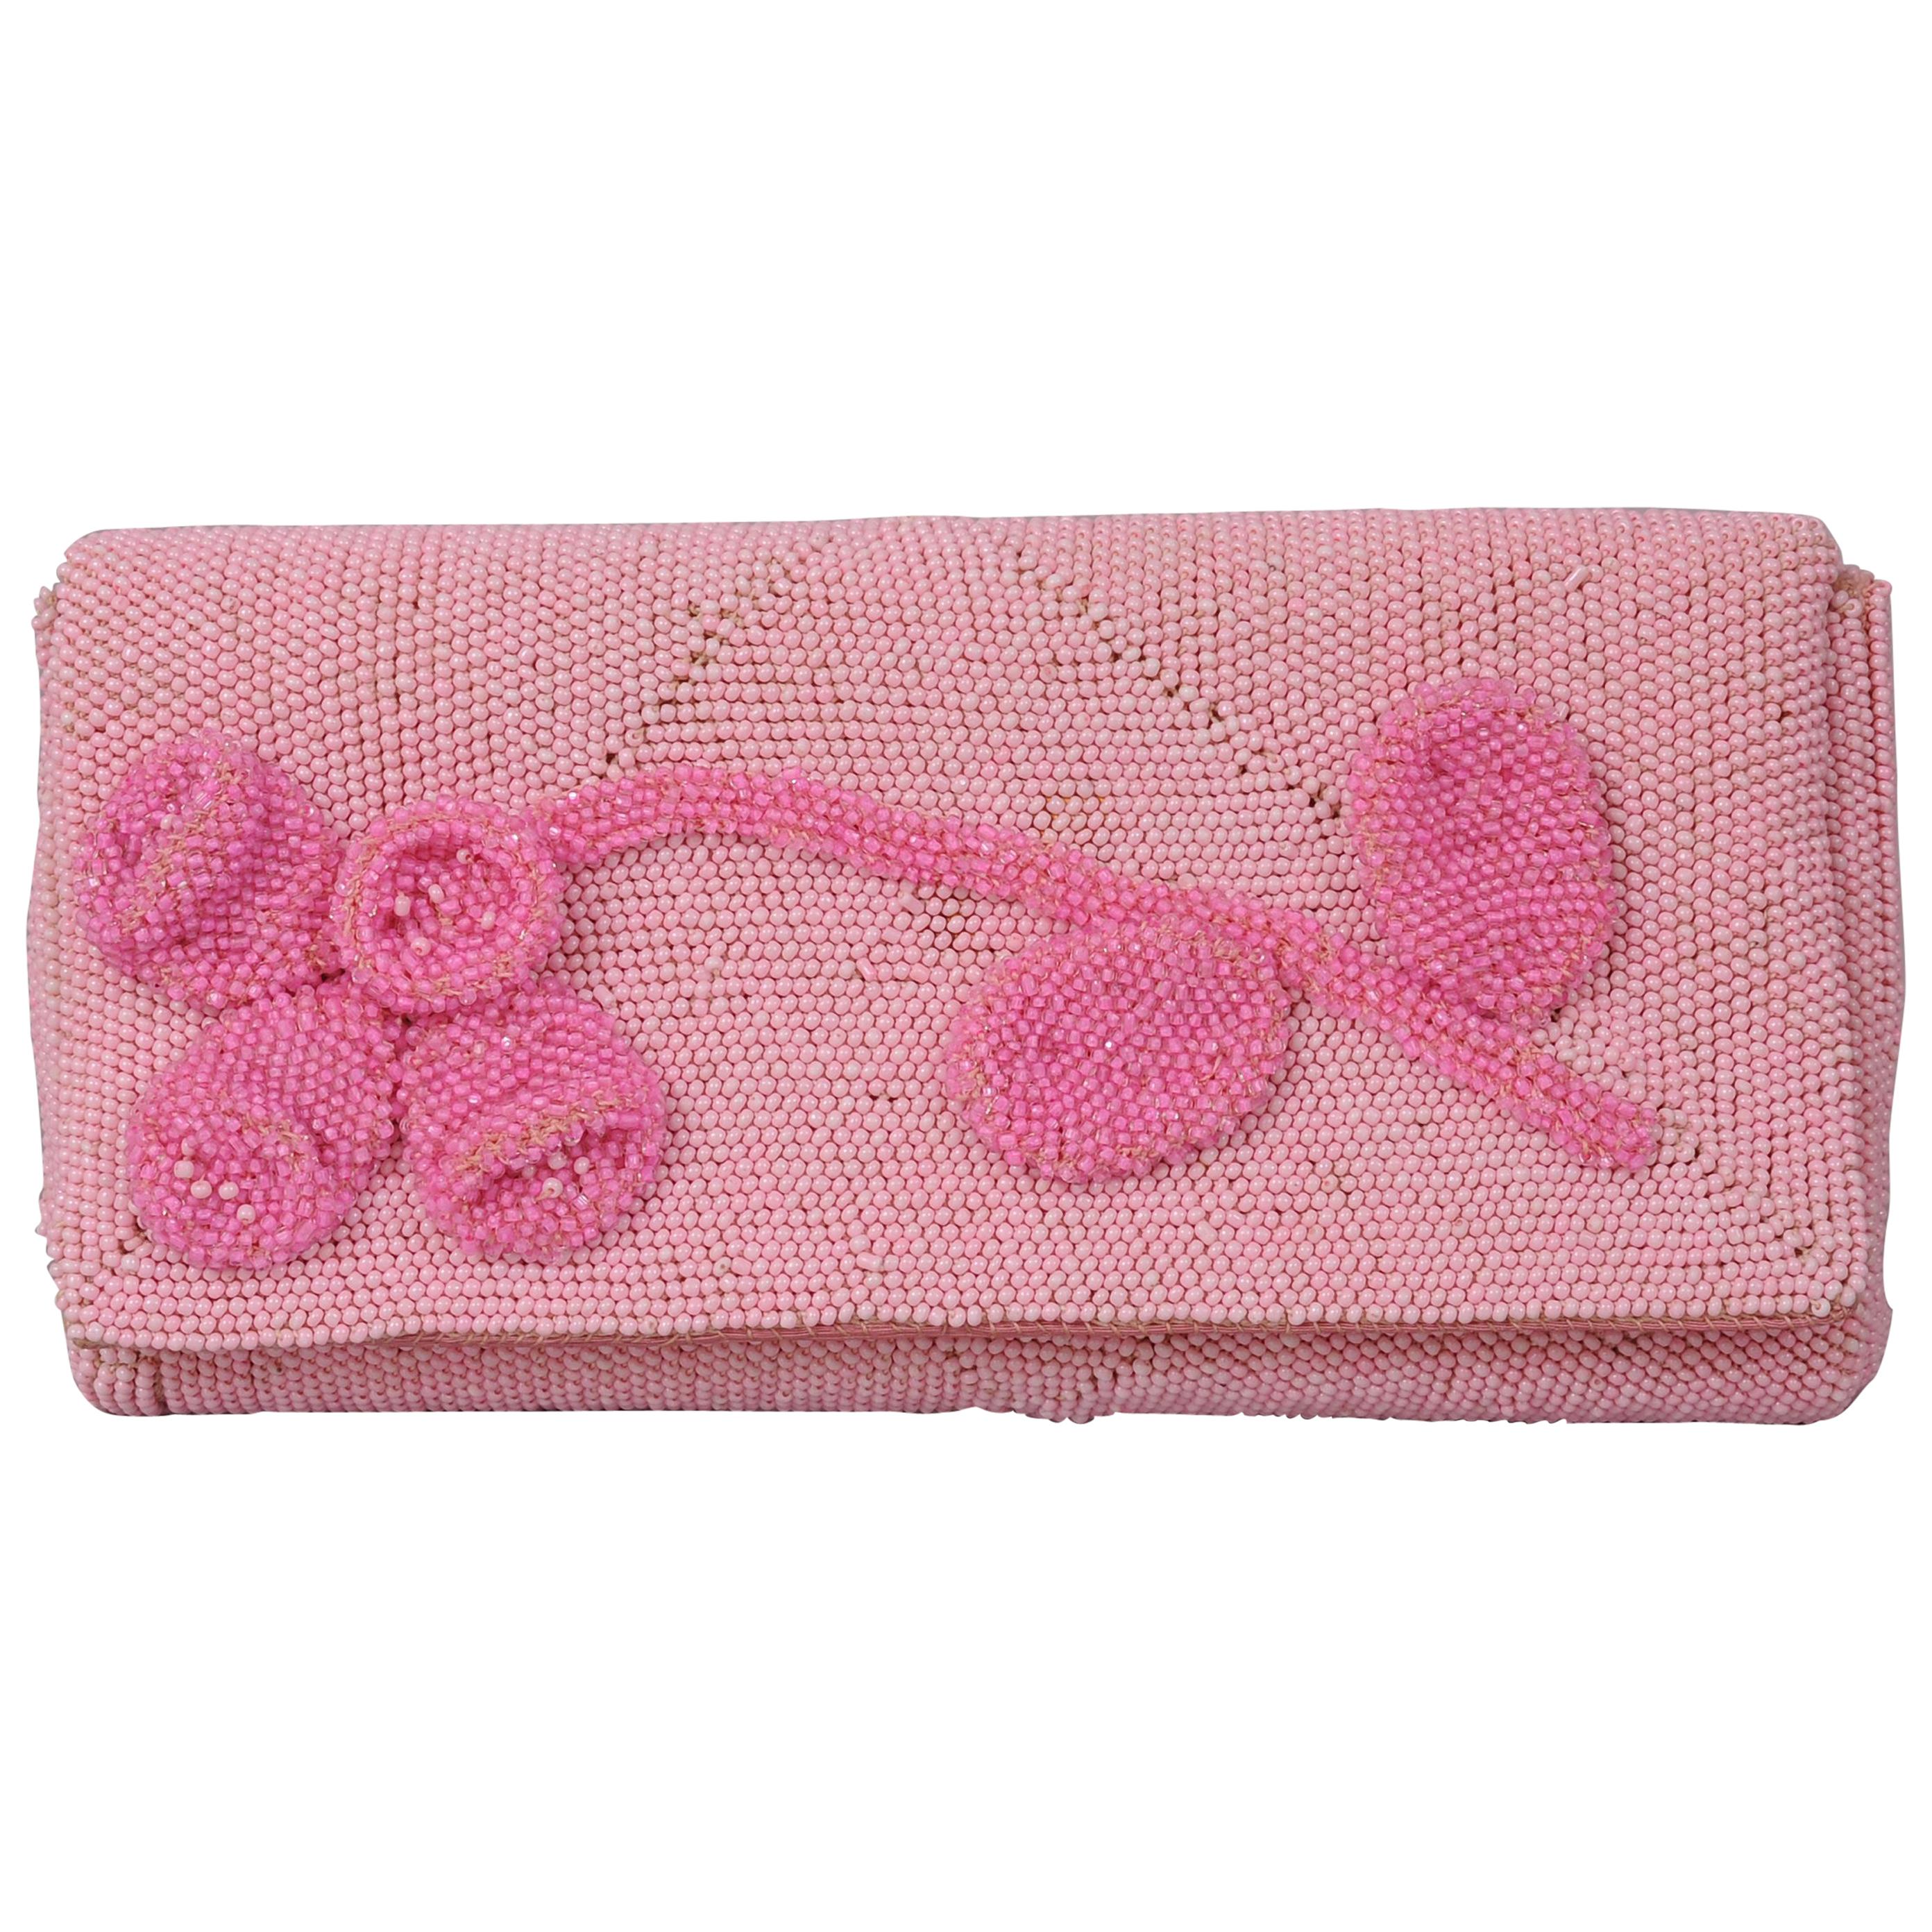 Hand Made Pink Beaded Clutch with a Bubblegum Pink Beaded Flower Applique